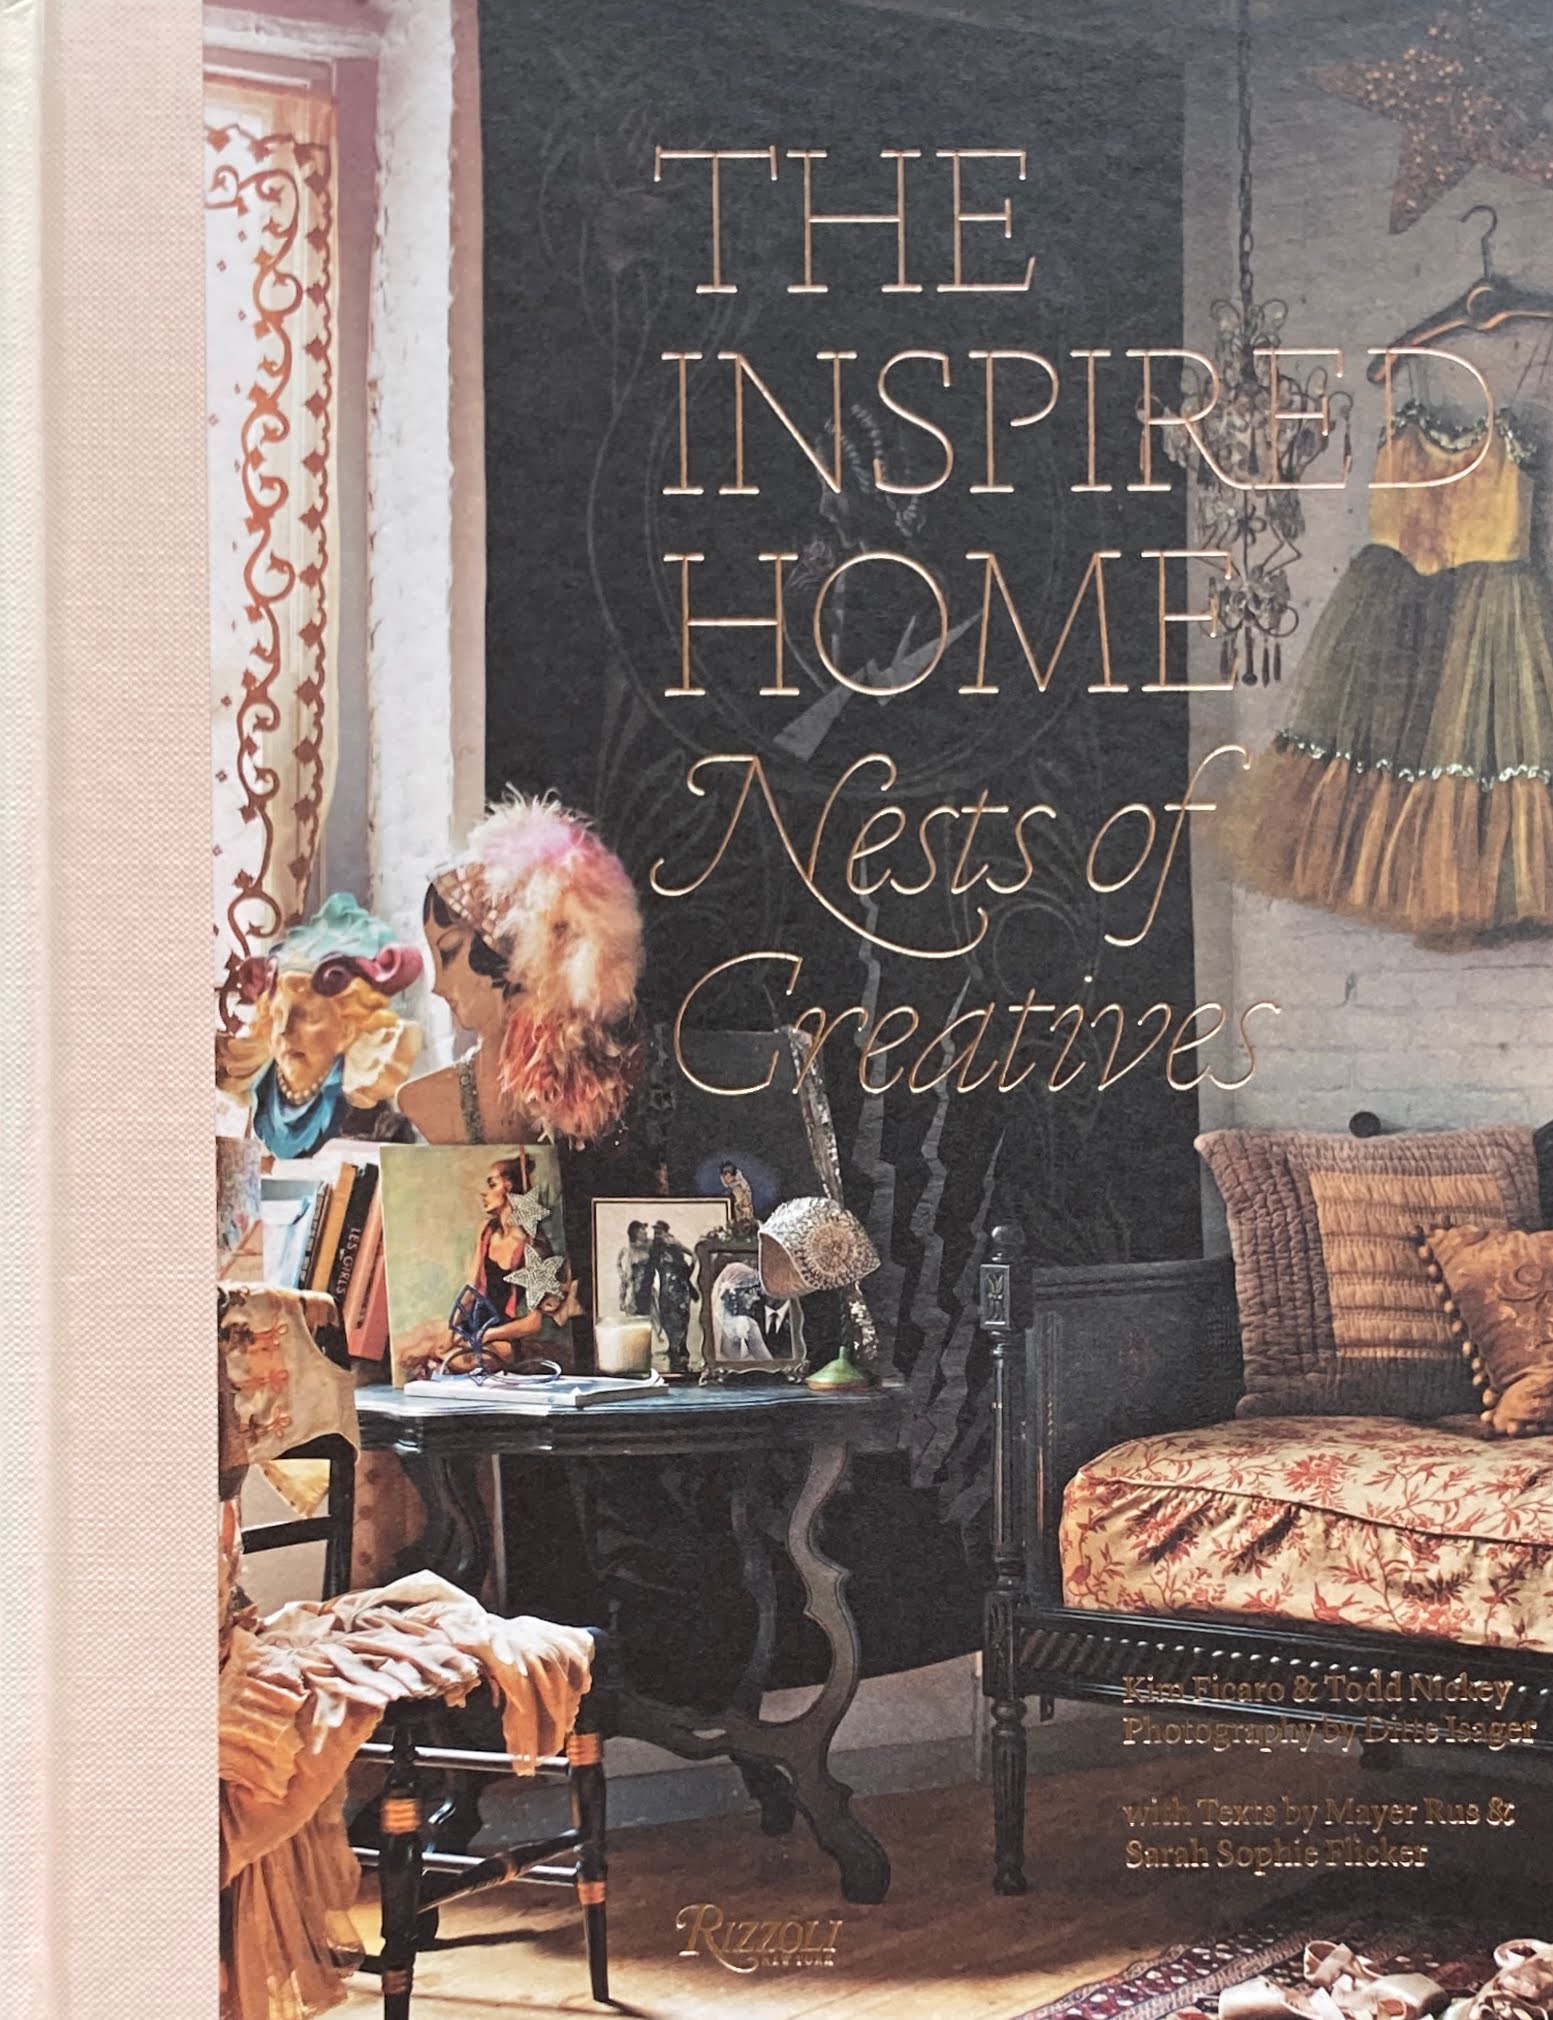 The Inspired Home　Nests of Creatives　Kim Ficaro　Todd Nickey